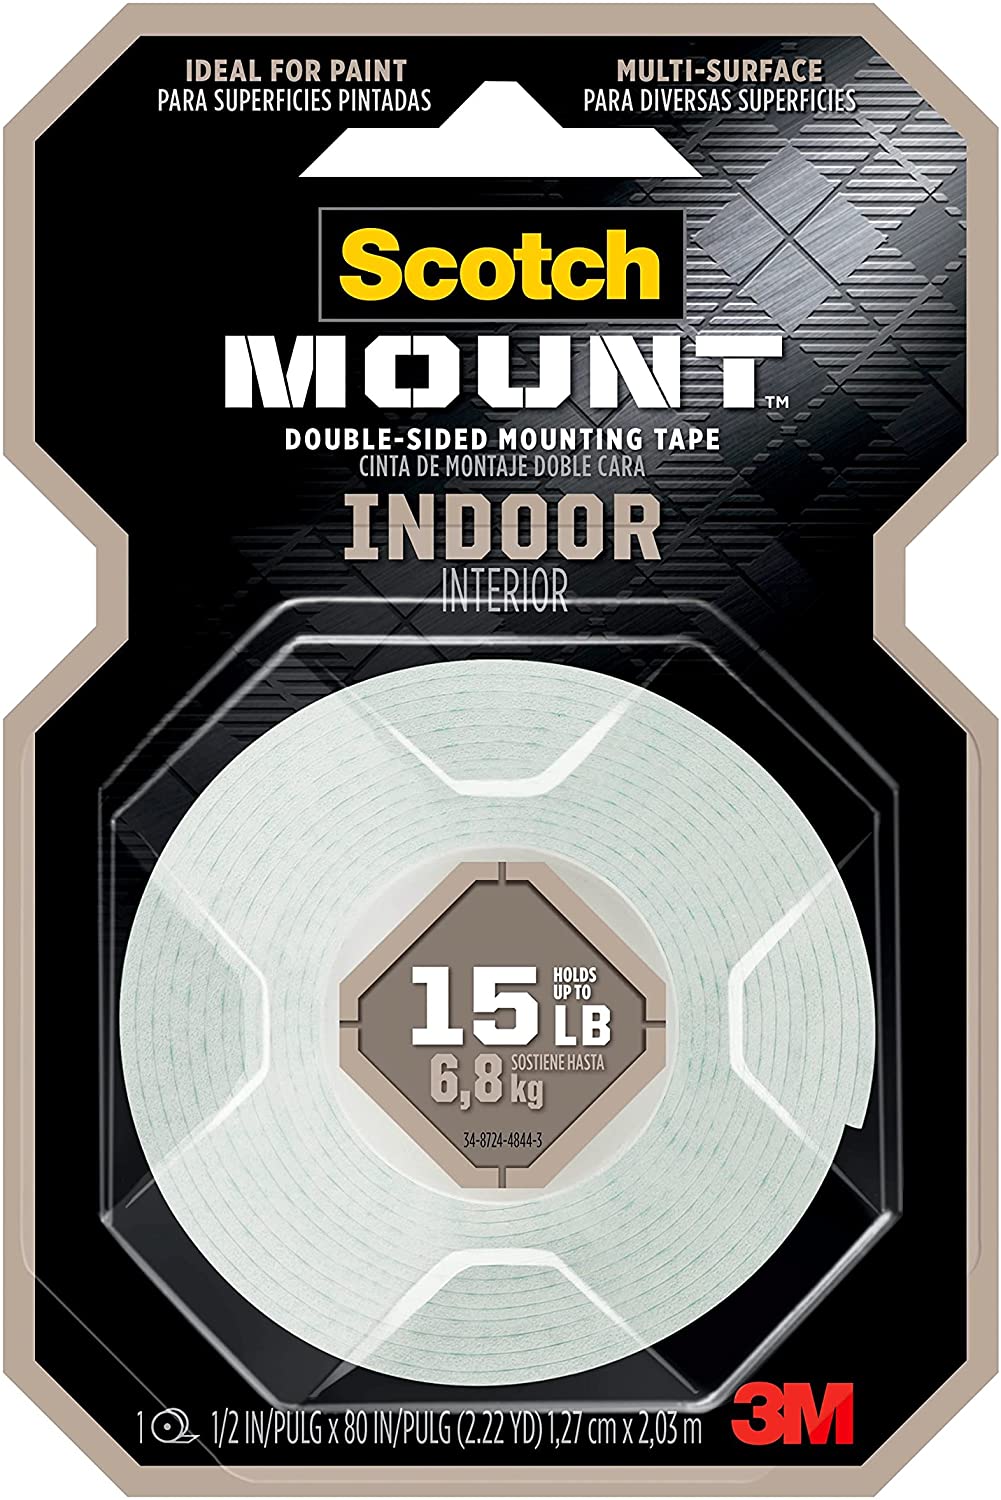 3M Scotch Mount Indoor Double-Sided Mounting Tape, 1/2 in x 80 in #110H